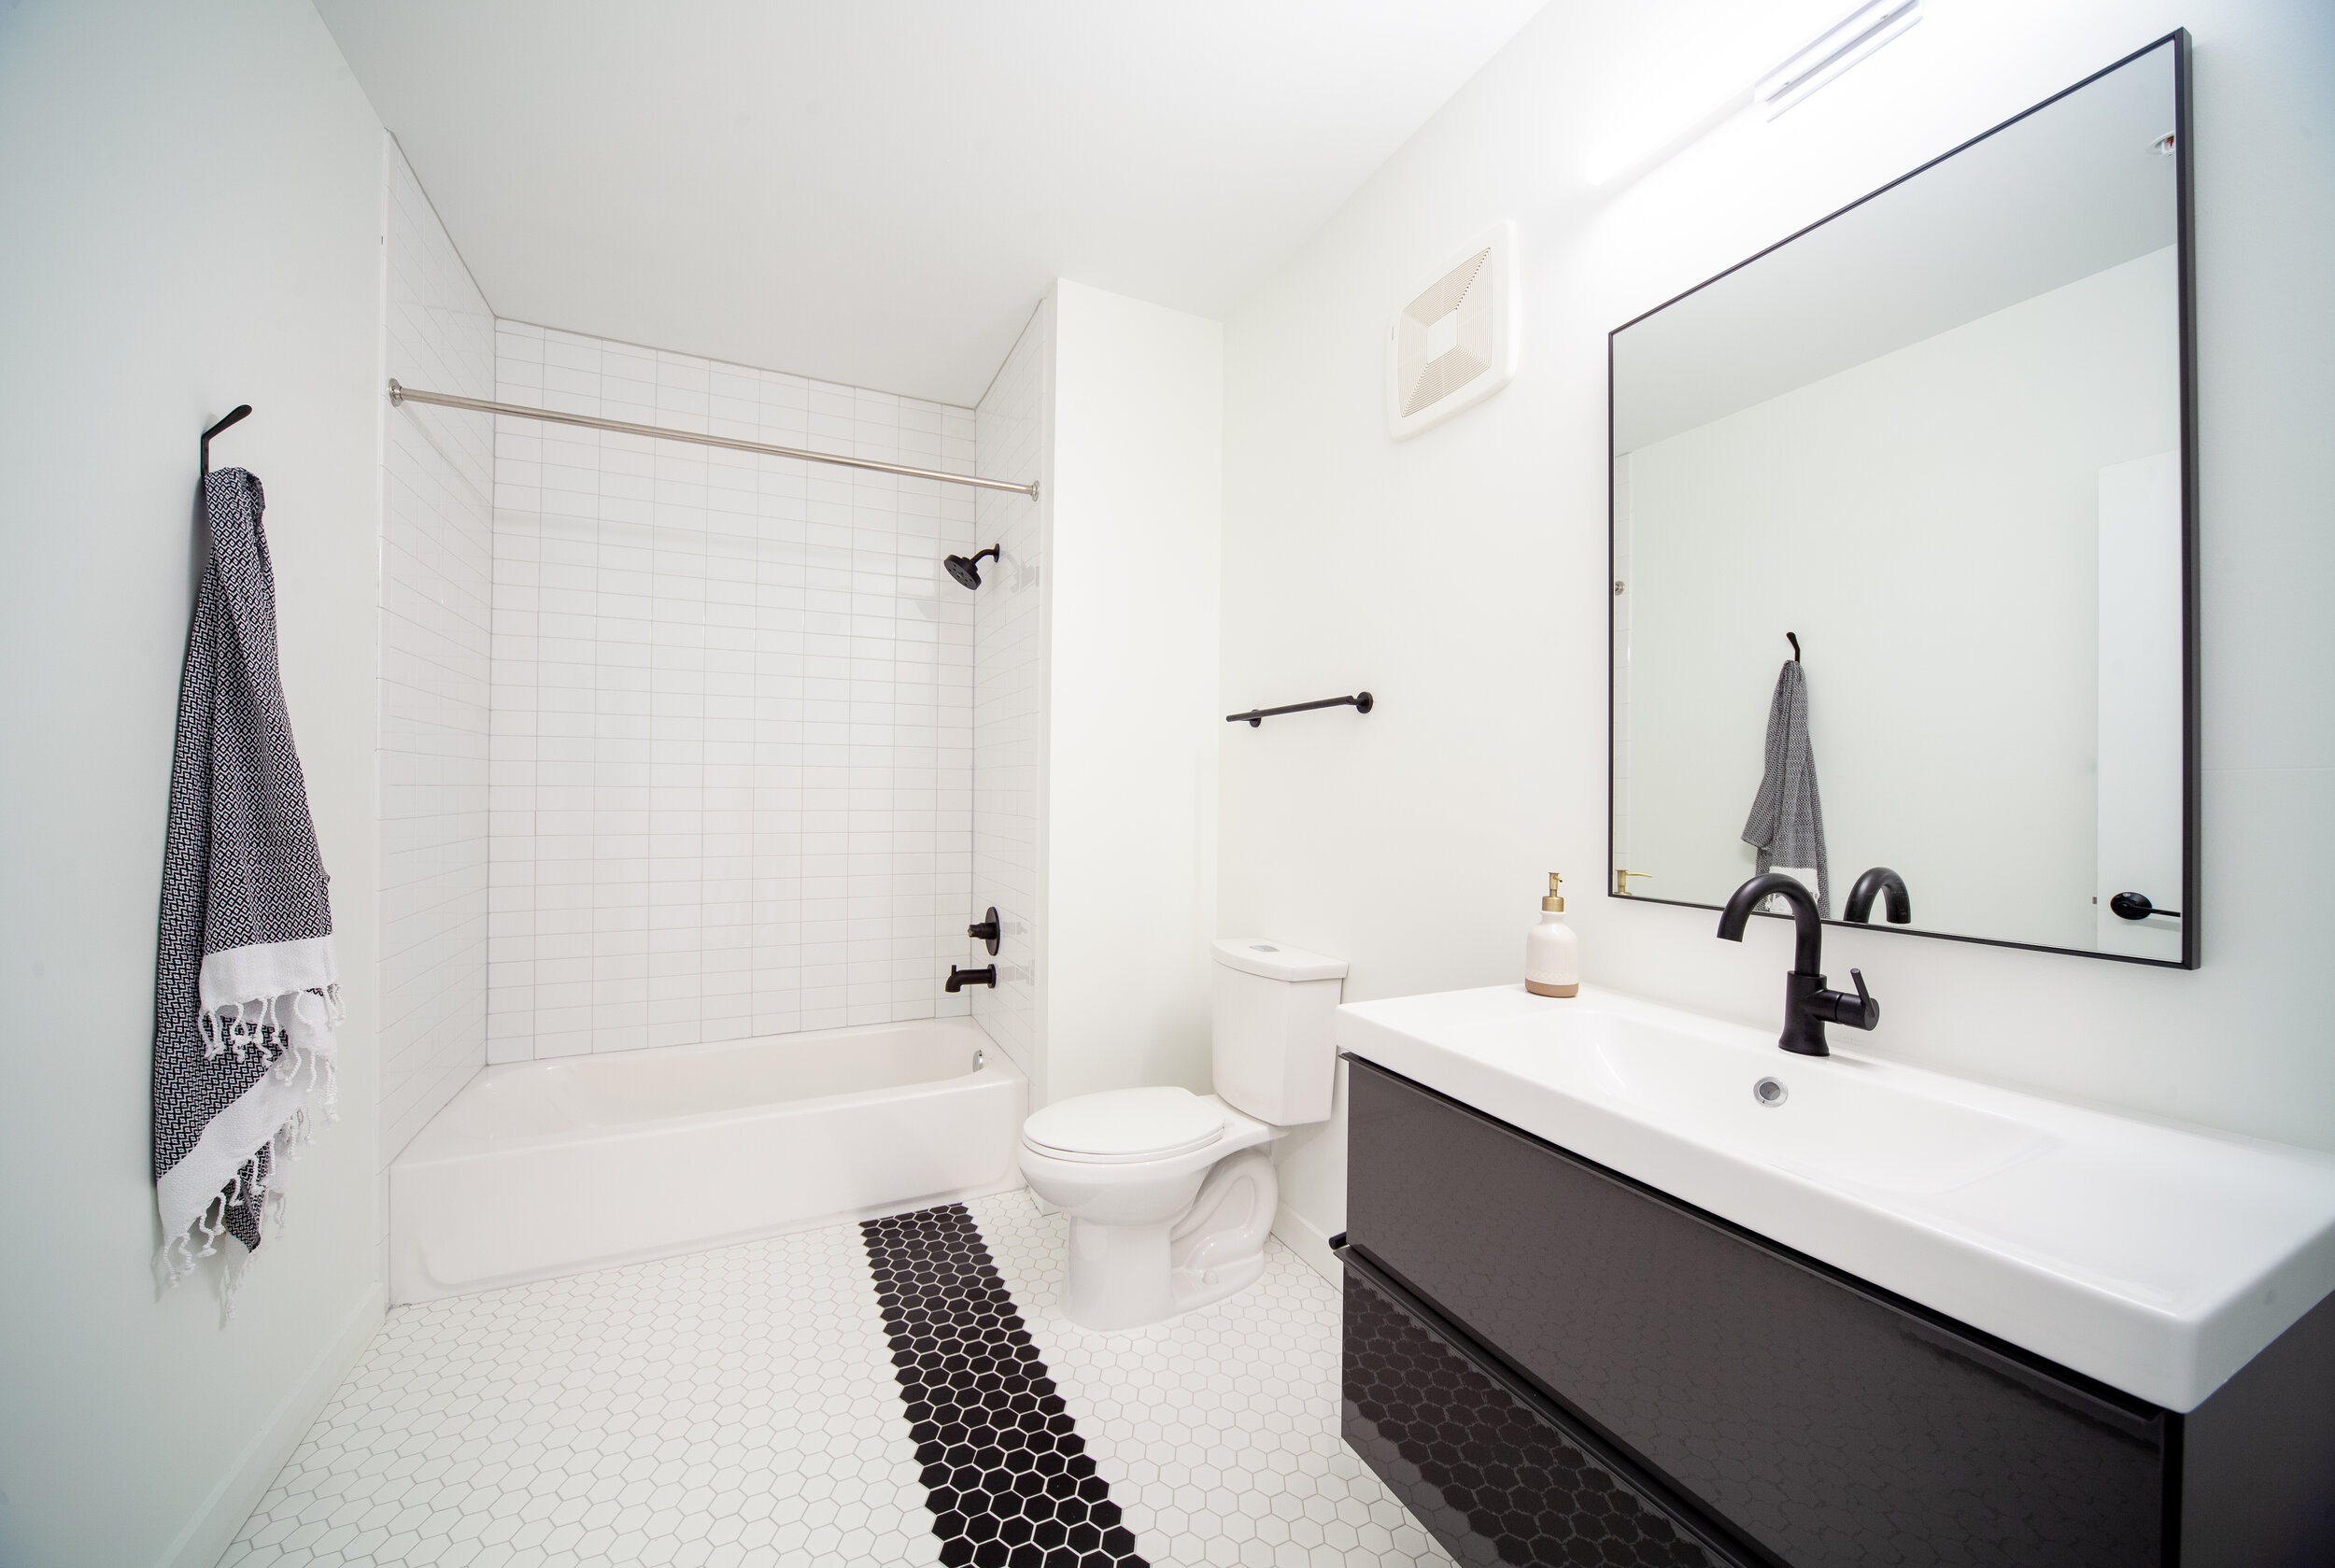 548 West State - Luxurious Bathrooms